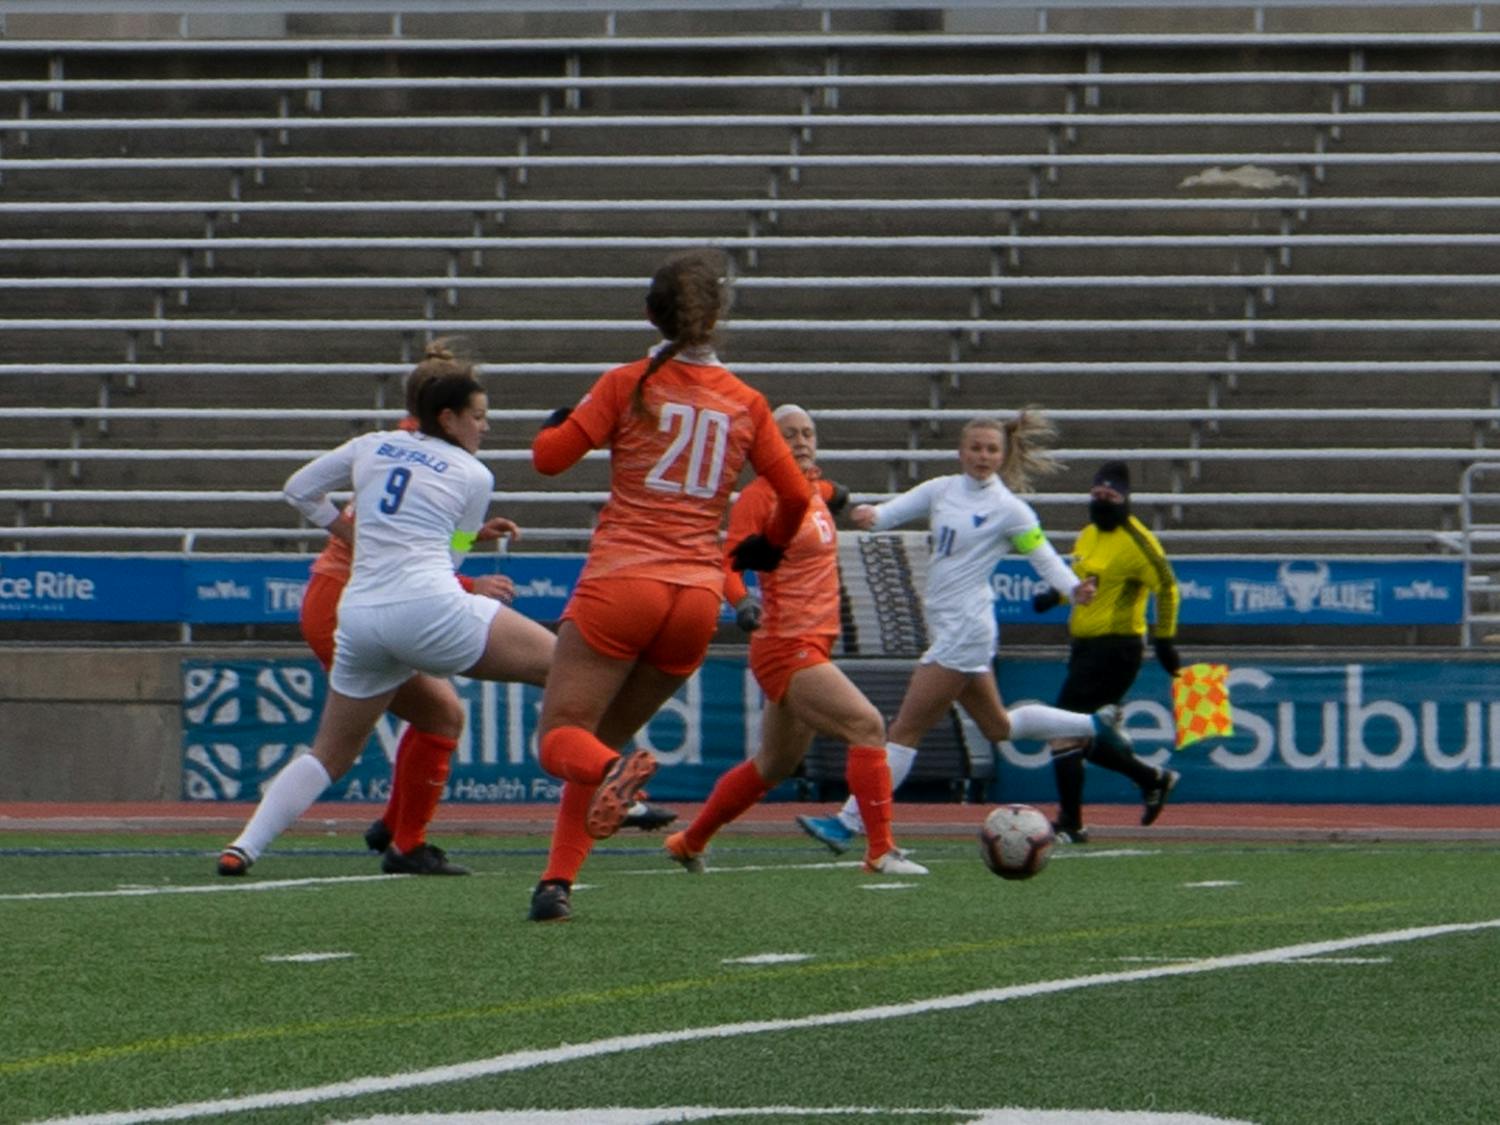 UB defeated Bowling Green, the defending MAC champions, 2-1 on March 14.